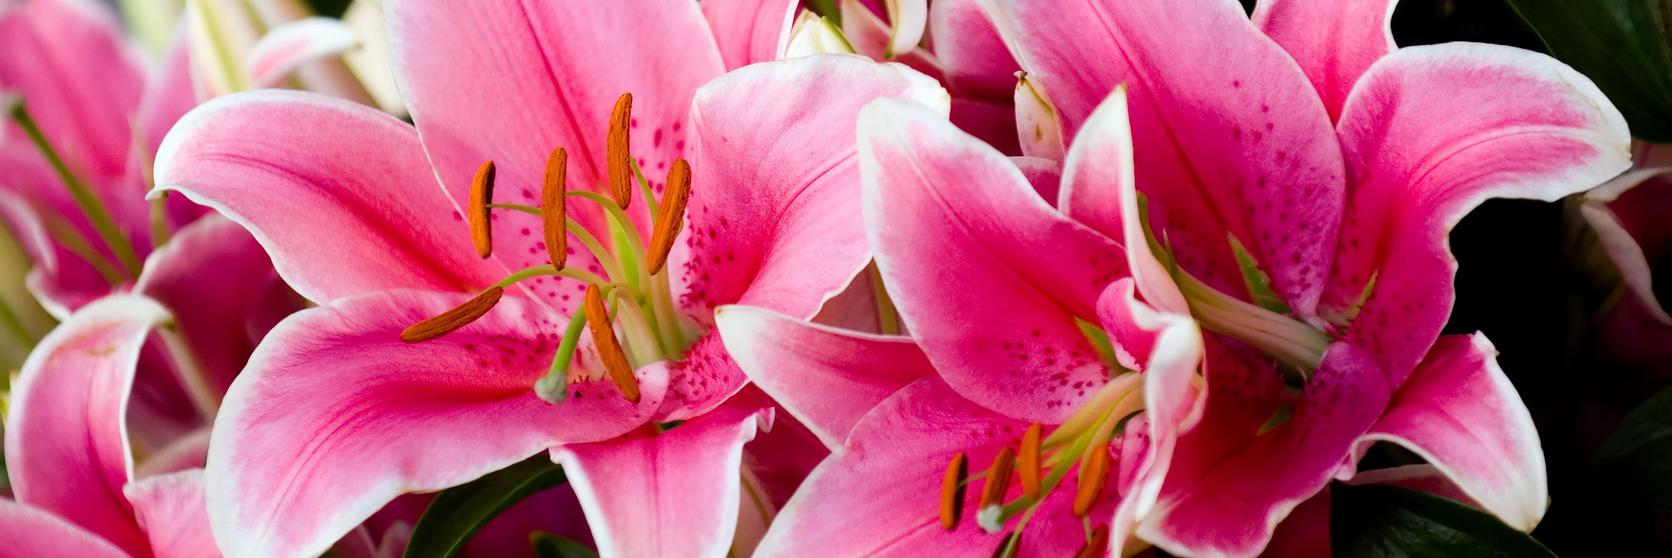 lily-pink-asiatic-flowers